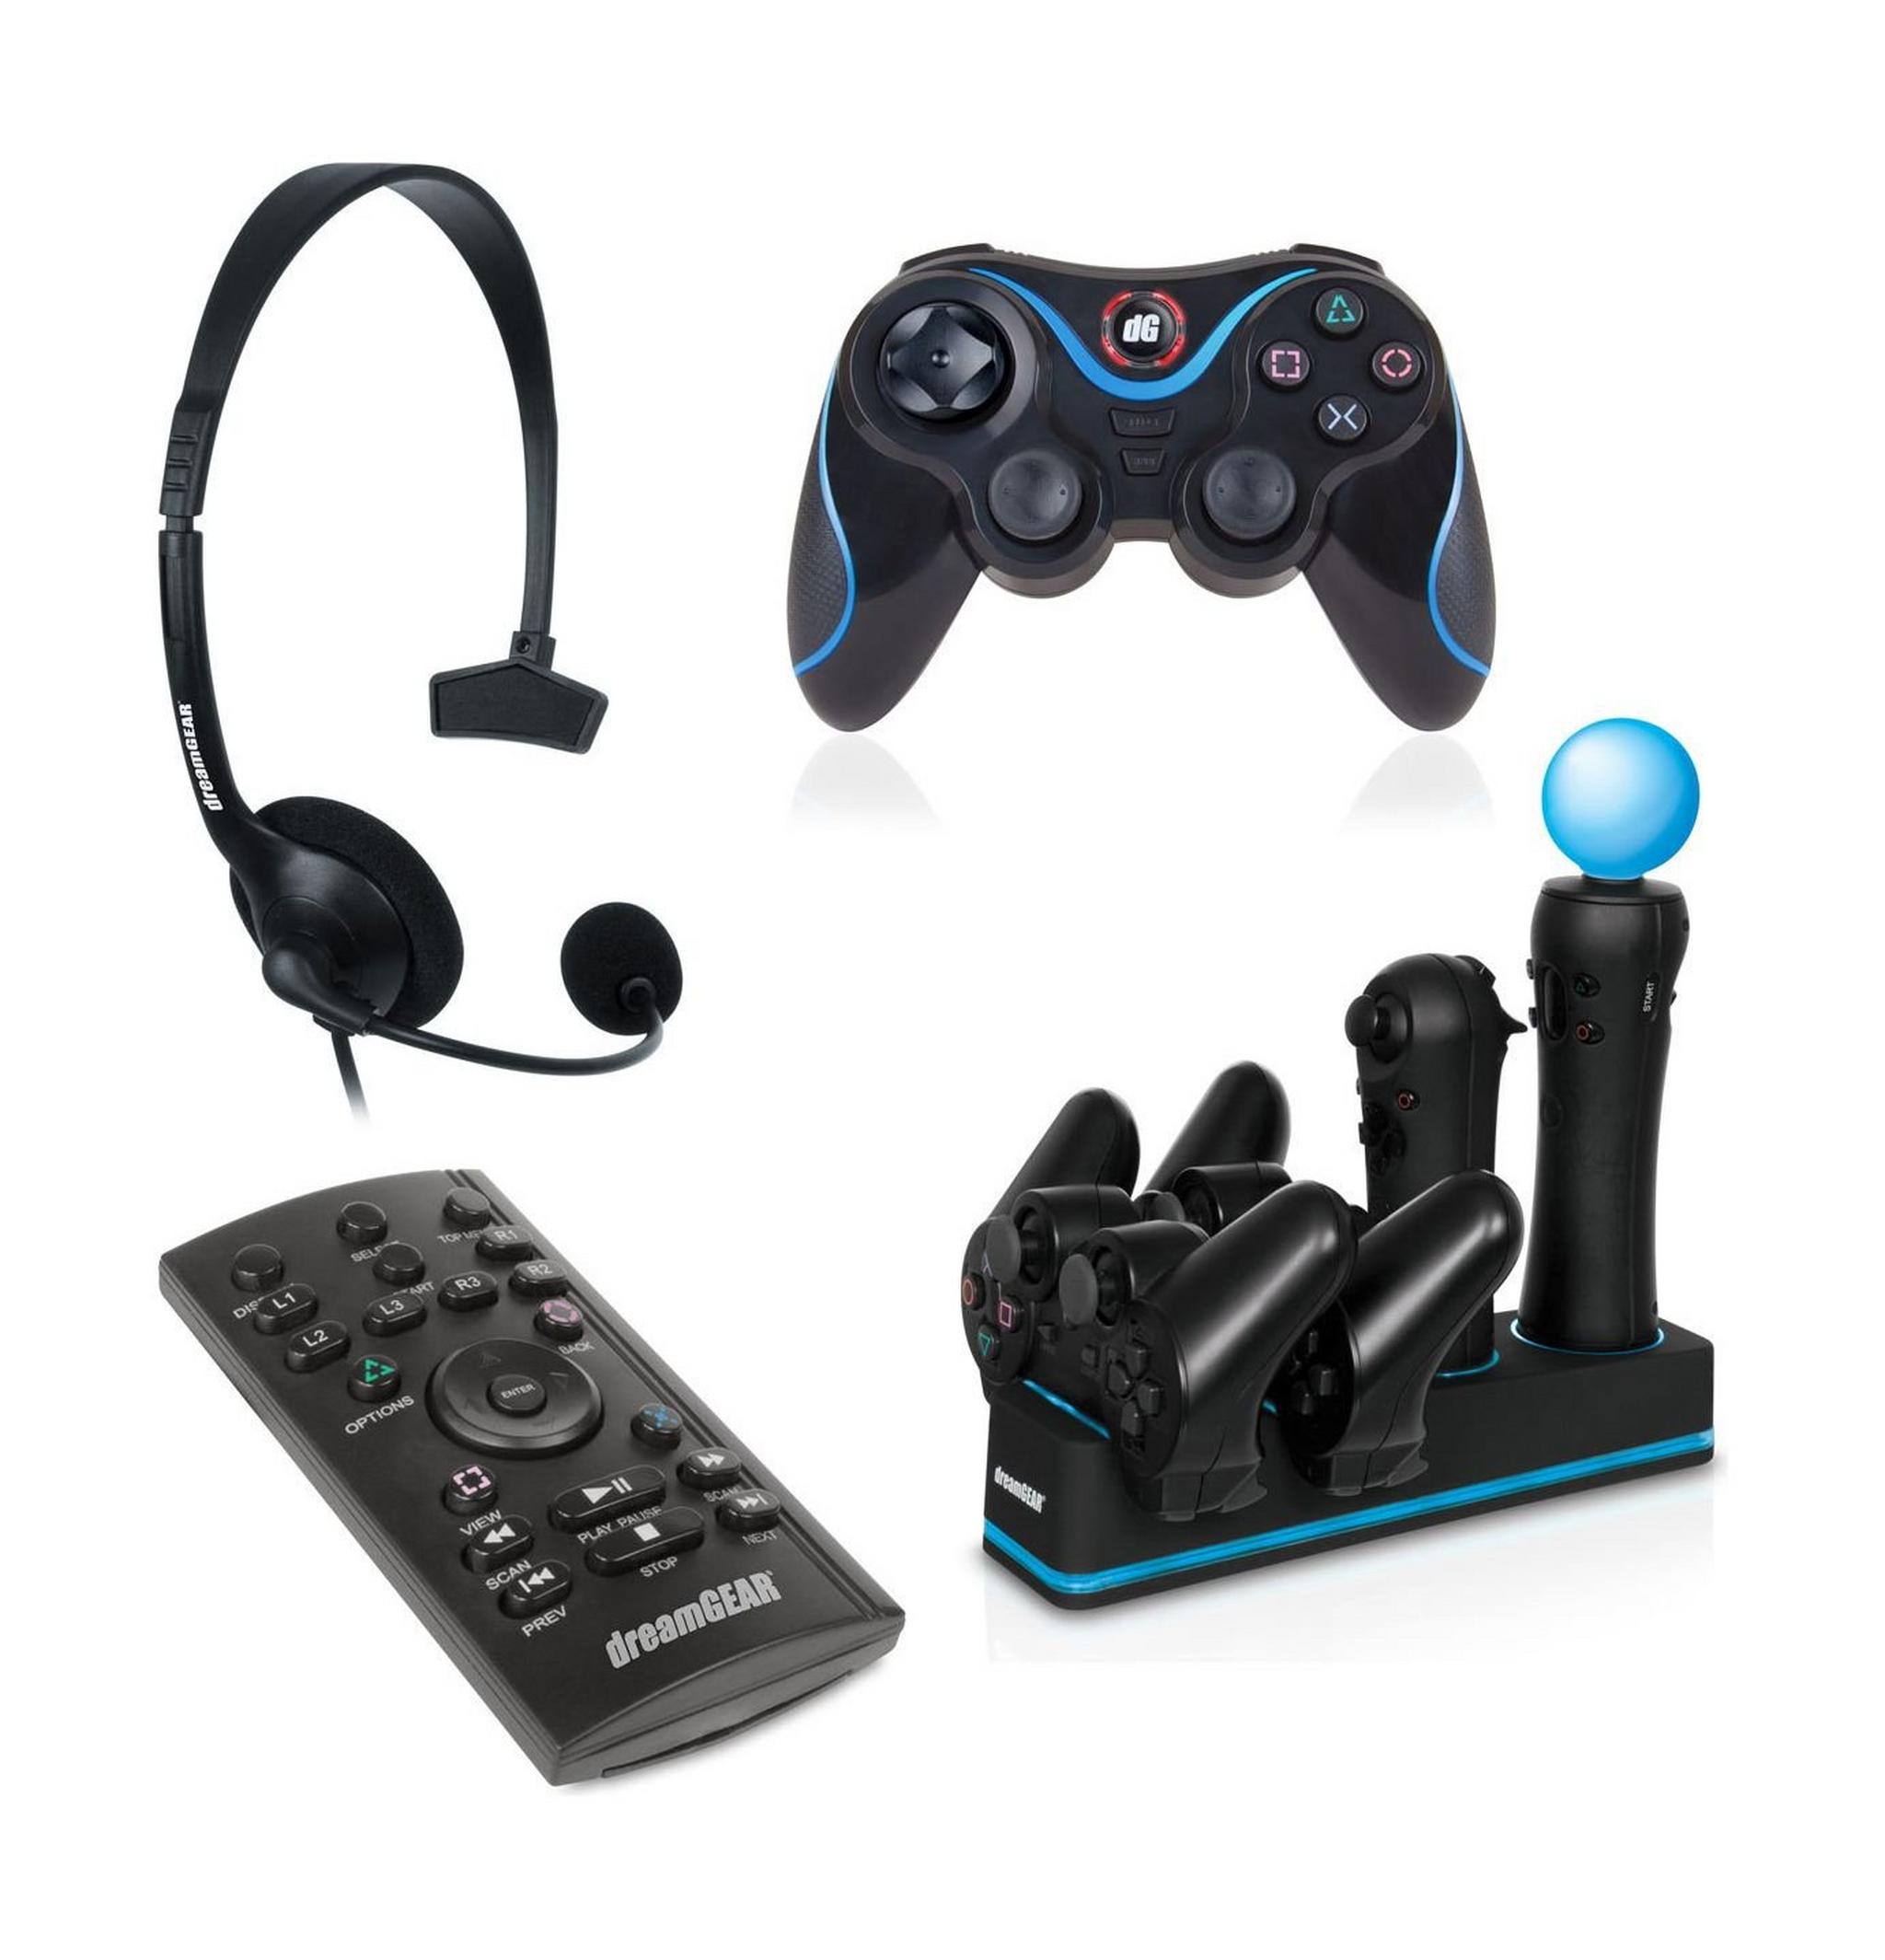 Dream Gear 4 in 1 Starter Pack for PlayStation 3 (DGPS3-3864)